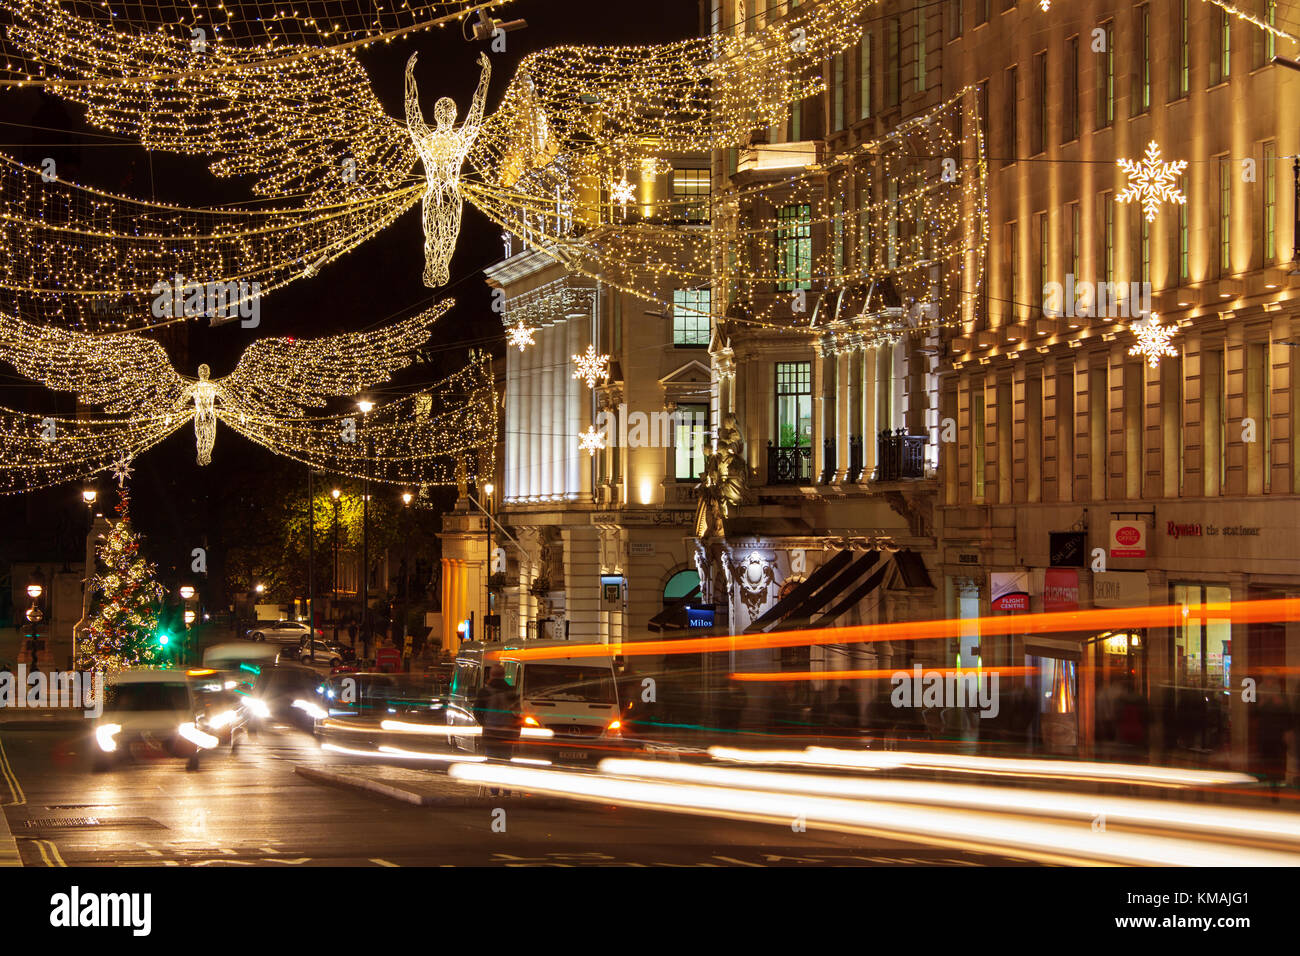 LONDON, UK - DECEMBER 4th, 2017: Christmas lights on Regents Street St James. Beautiful Christmas decorations attract  shoppers and tourists during th Stock Photo